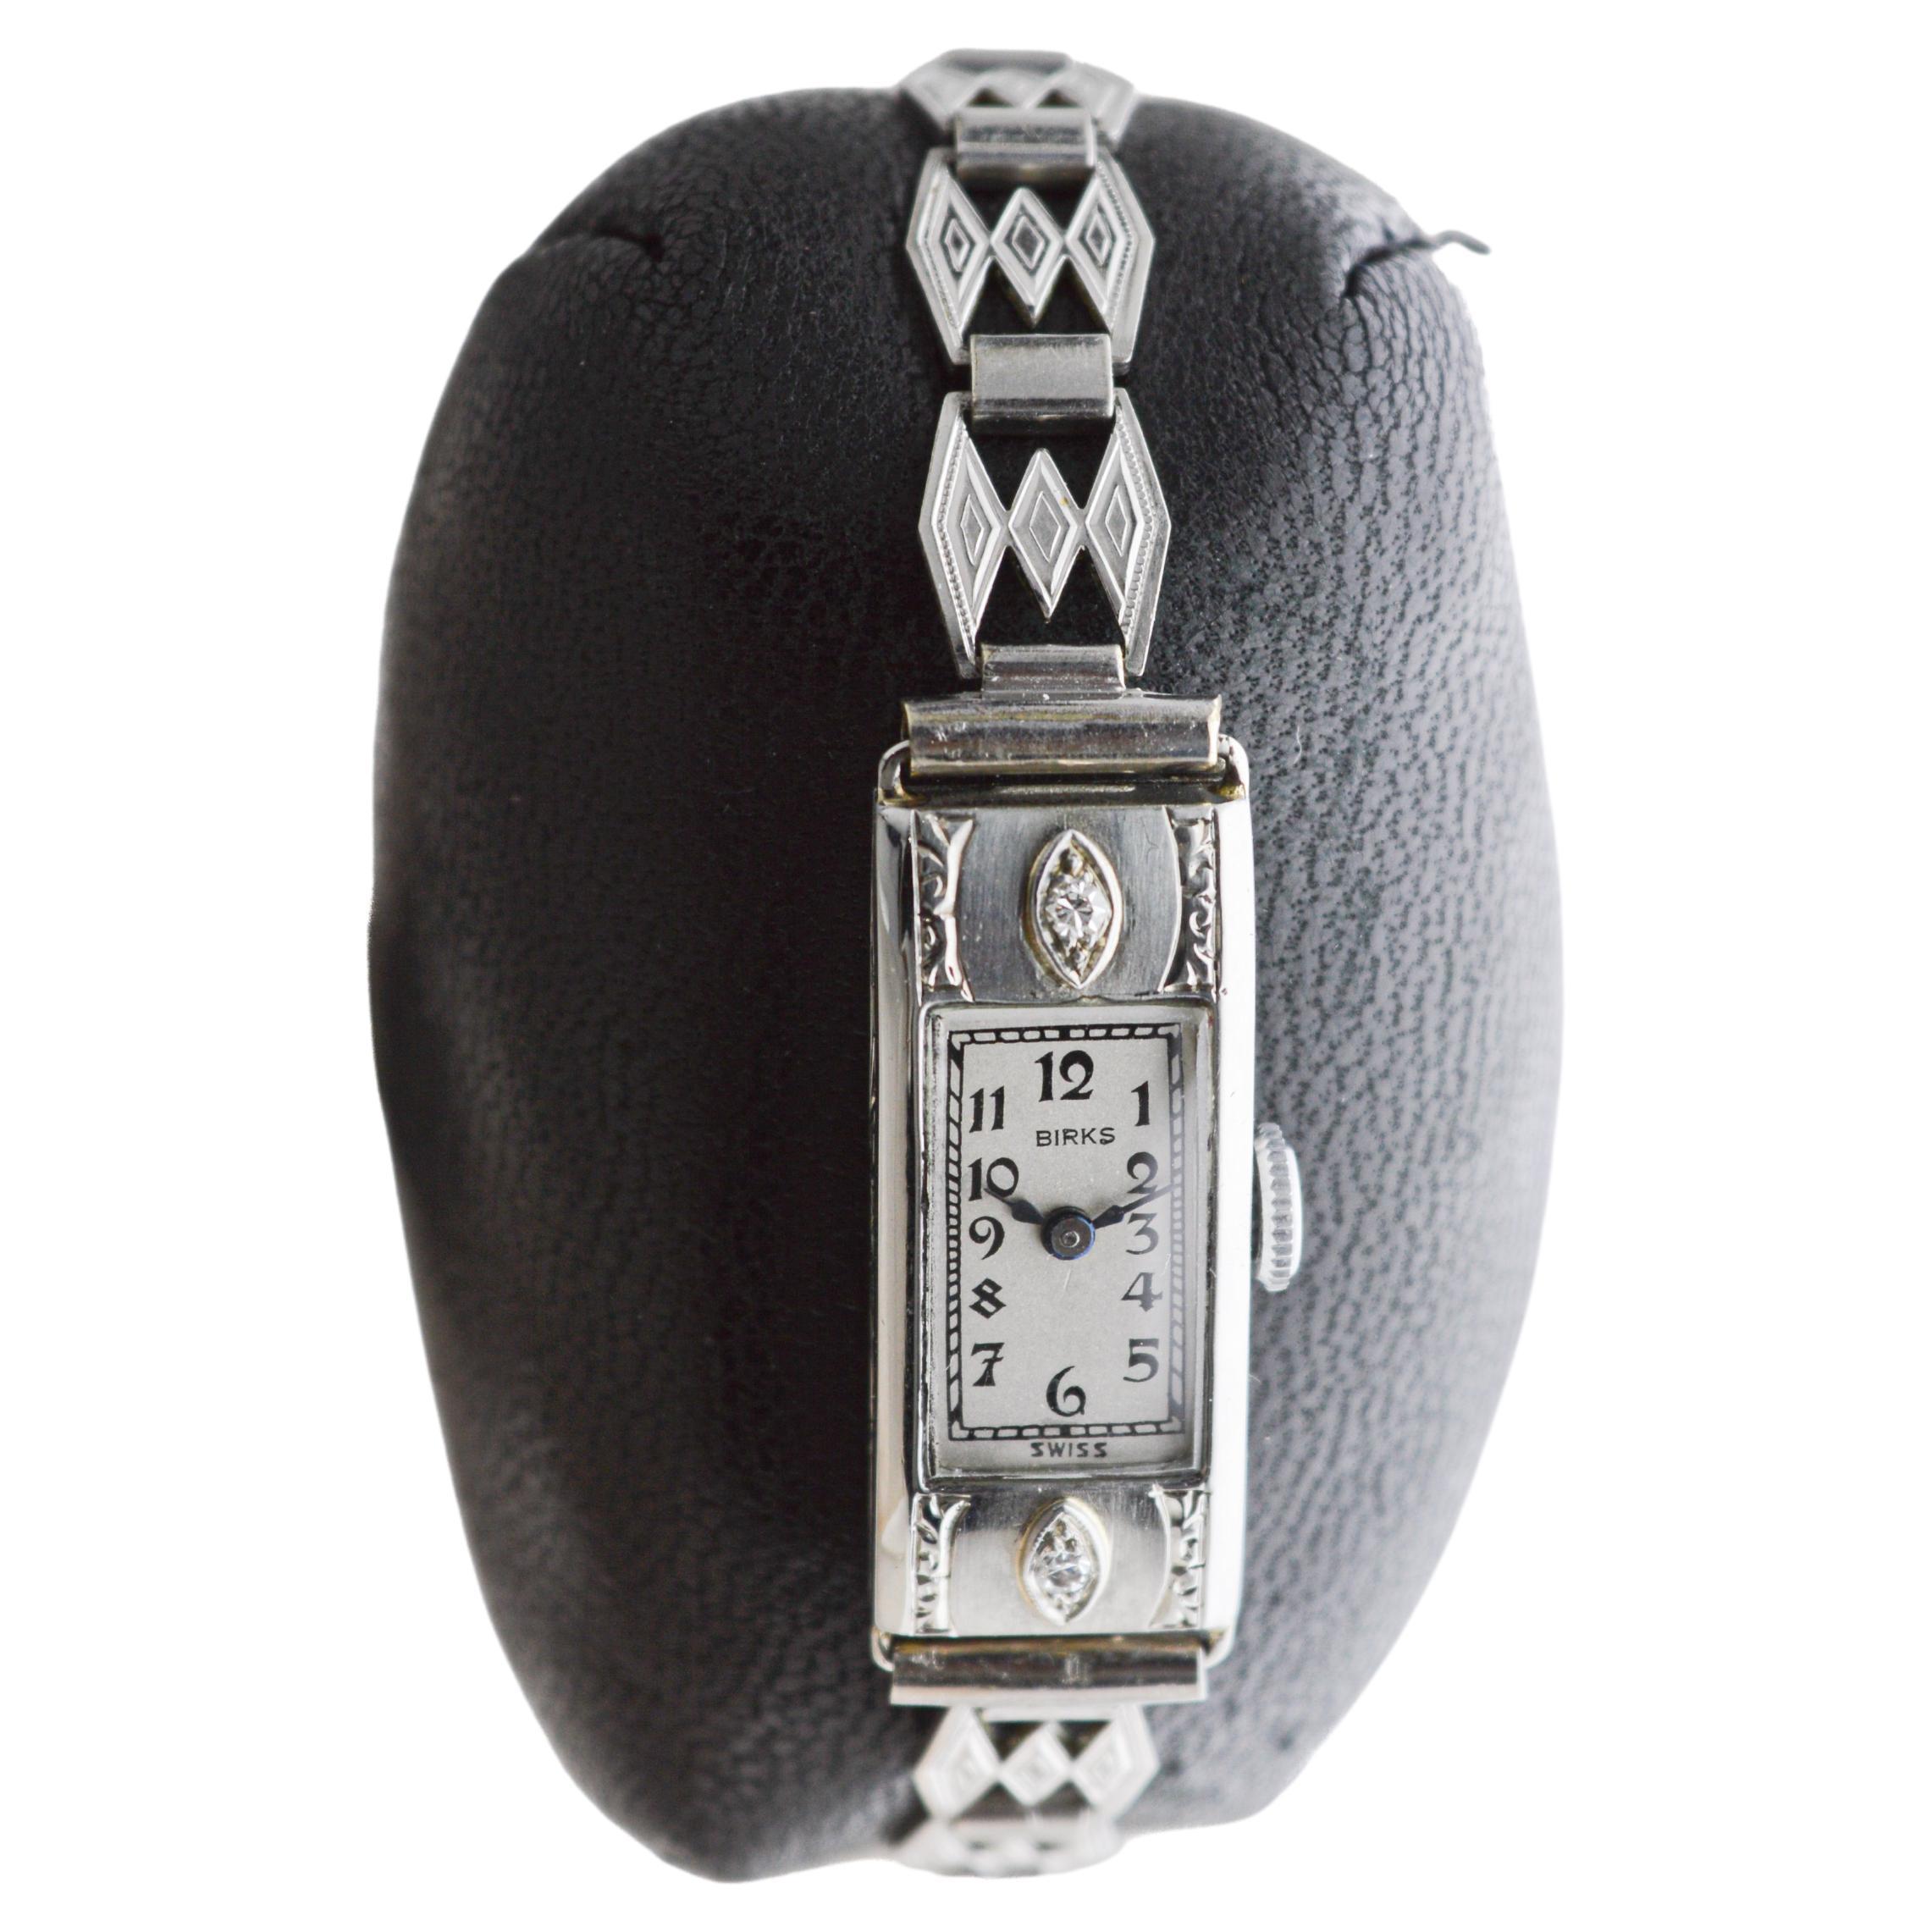 Birks 18Kt. White Gold Art Deco Ladie's Watch 1930's In Excellent Condition For Sale In Long Beach, CA